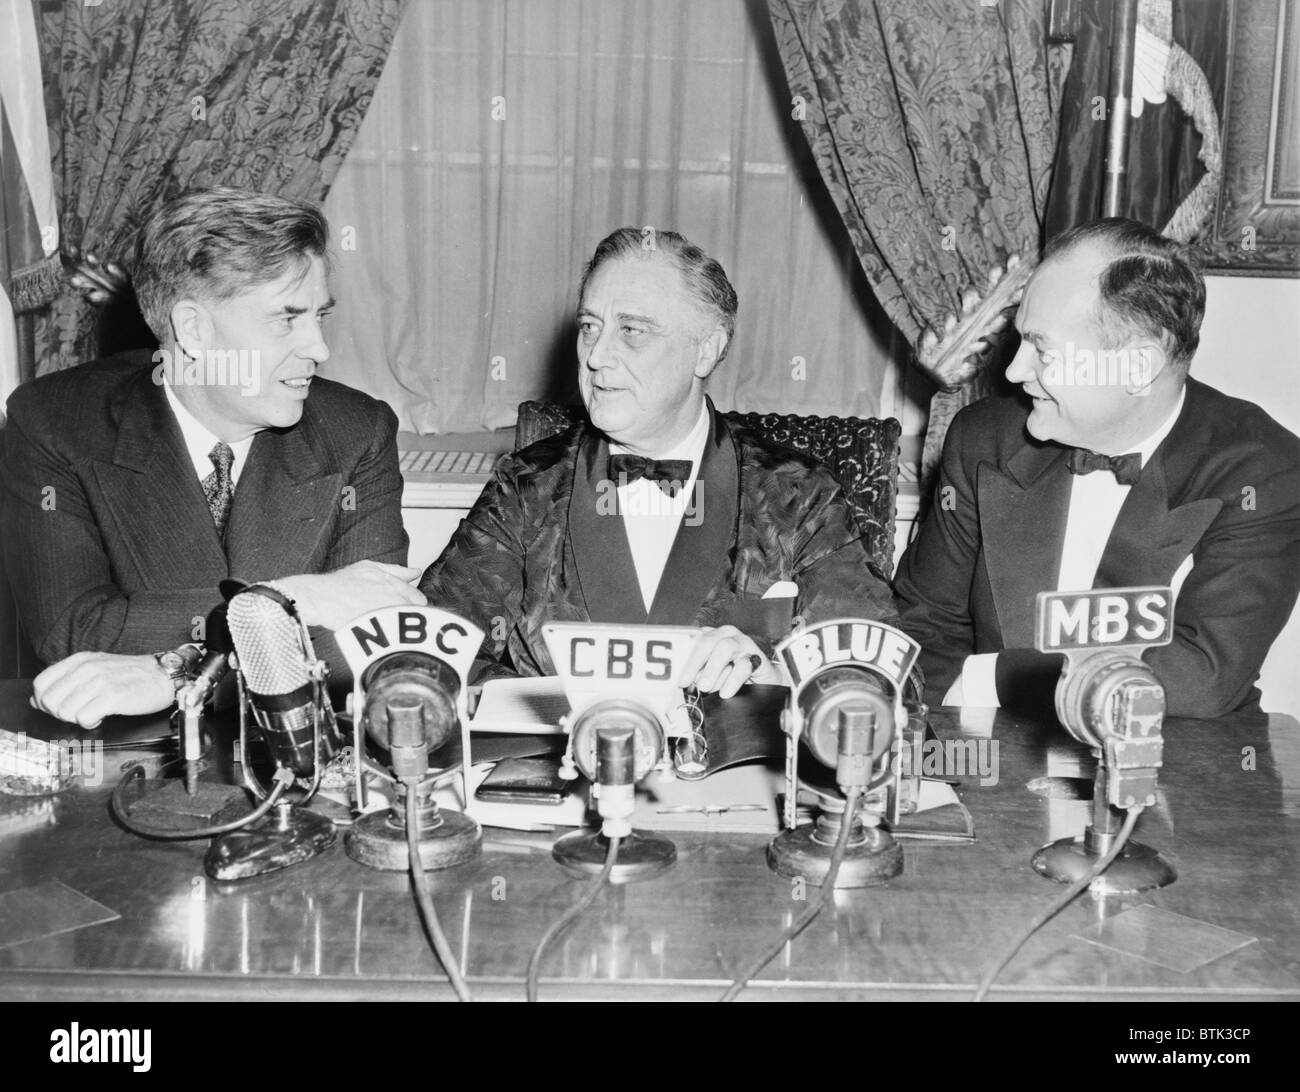 Vice President Henry A. Wallace, President Franklin D. Roosevelt, and Secretary of Agriculture Claude Wickard, at microphones for a radio broadcast against inflation. Wallace would assume wartime economic management. Stock Photo